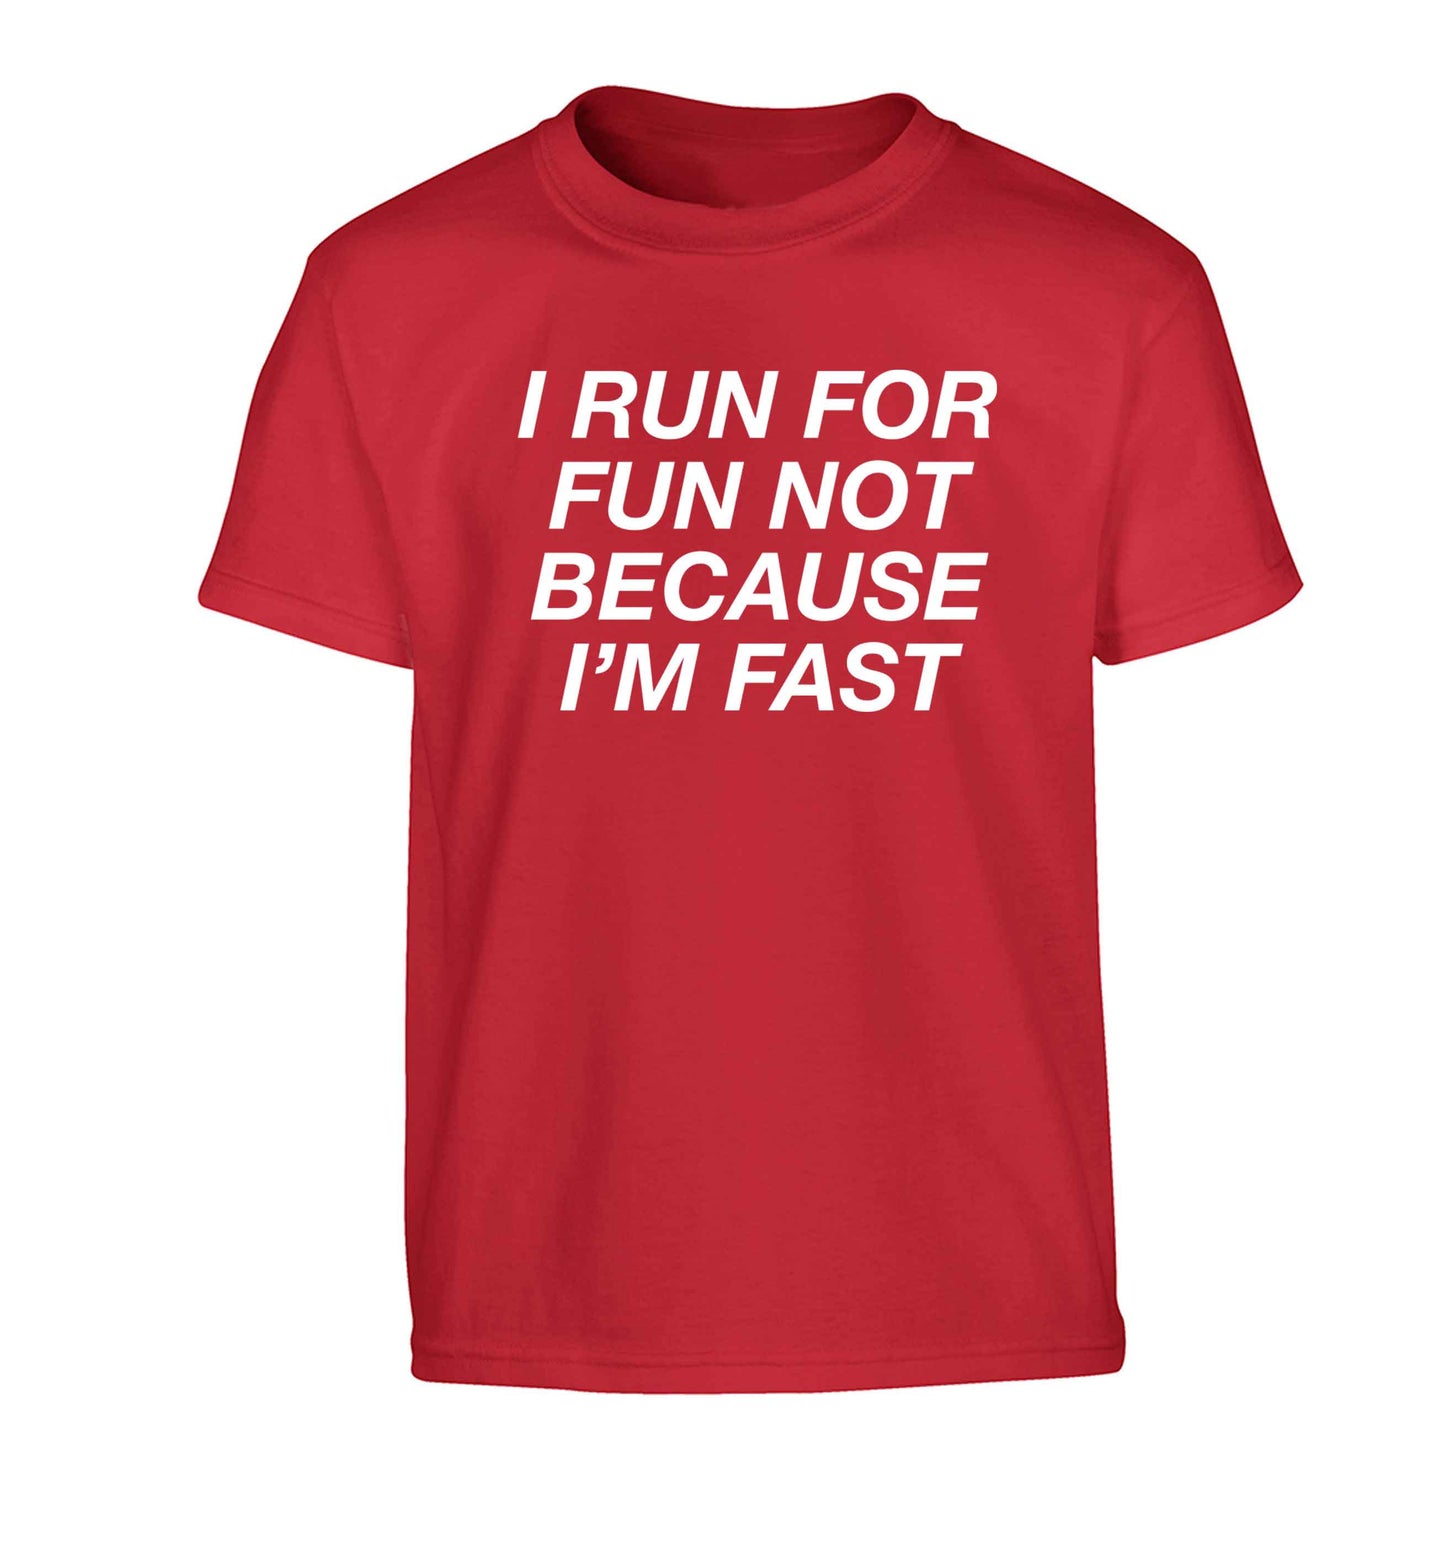 I run for fun not because I'm fast Children's red Tshirt 12-13 Years